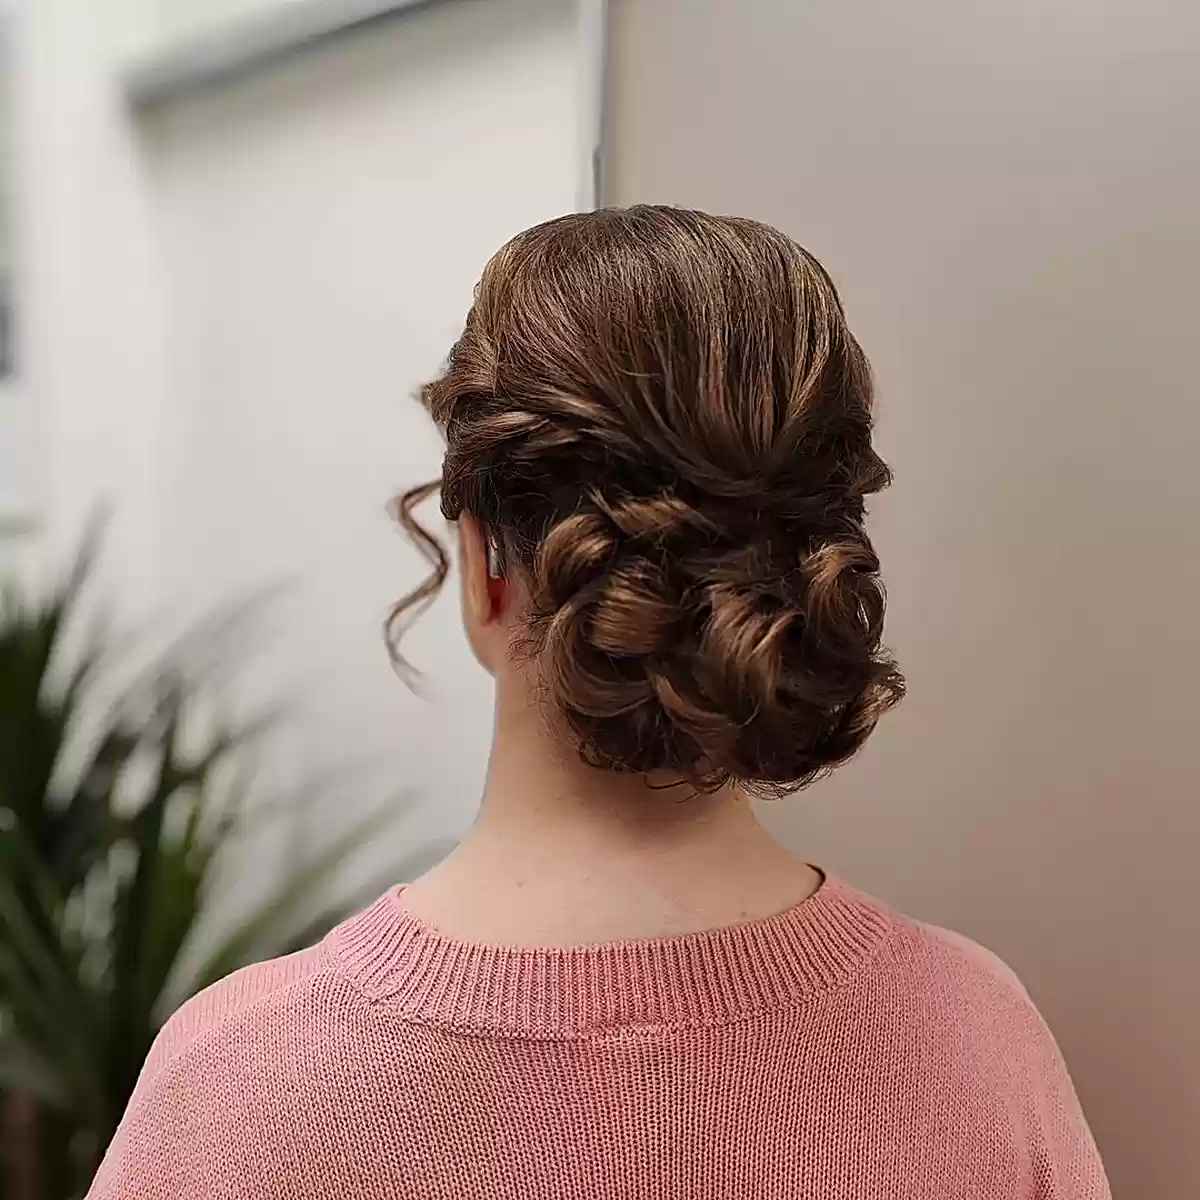 Long Curled Brunette Updo for Prom Night